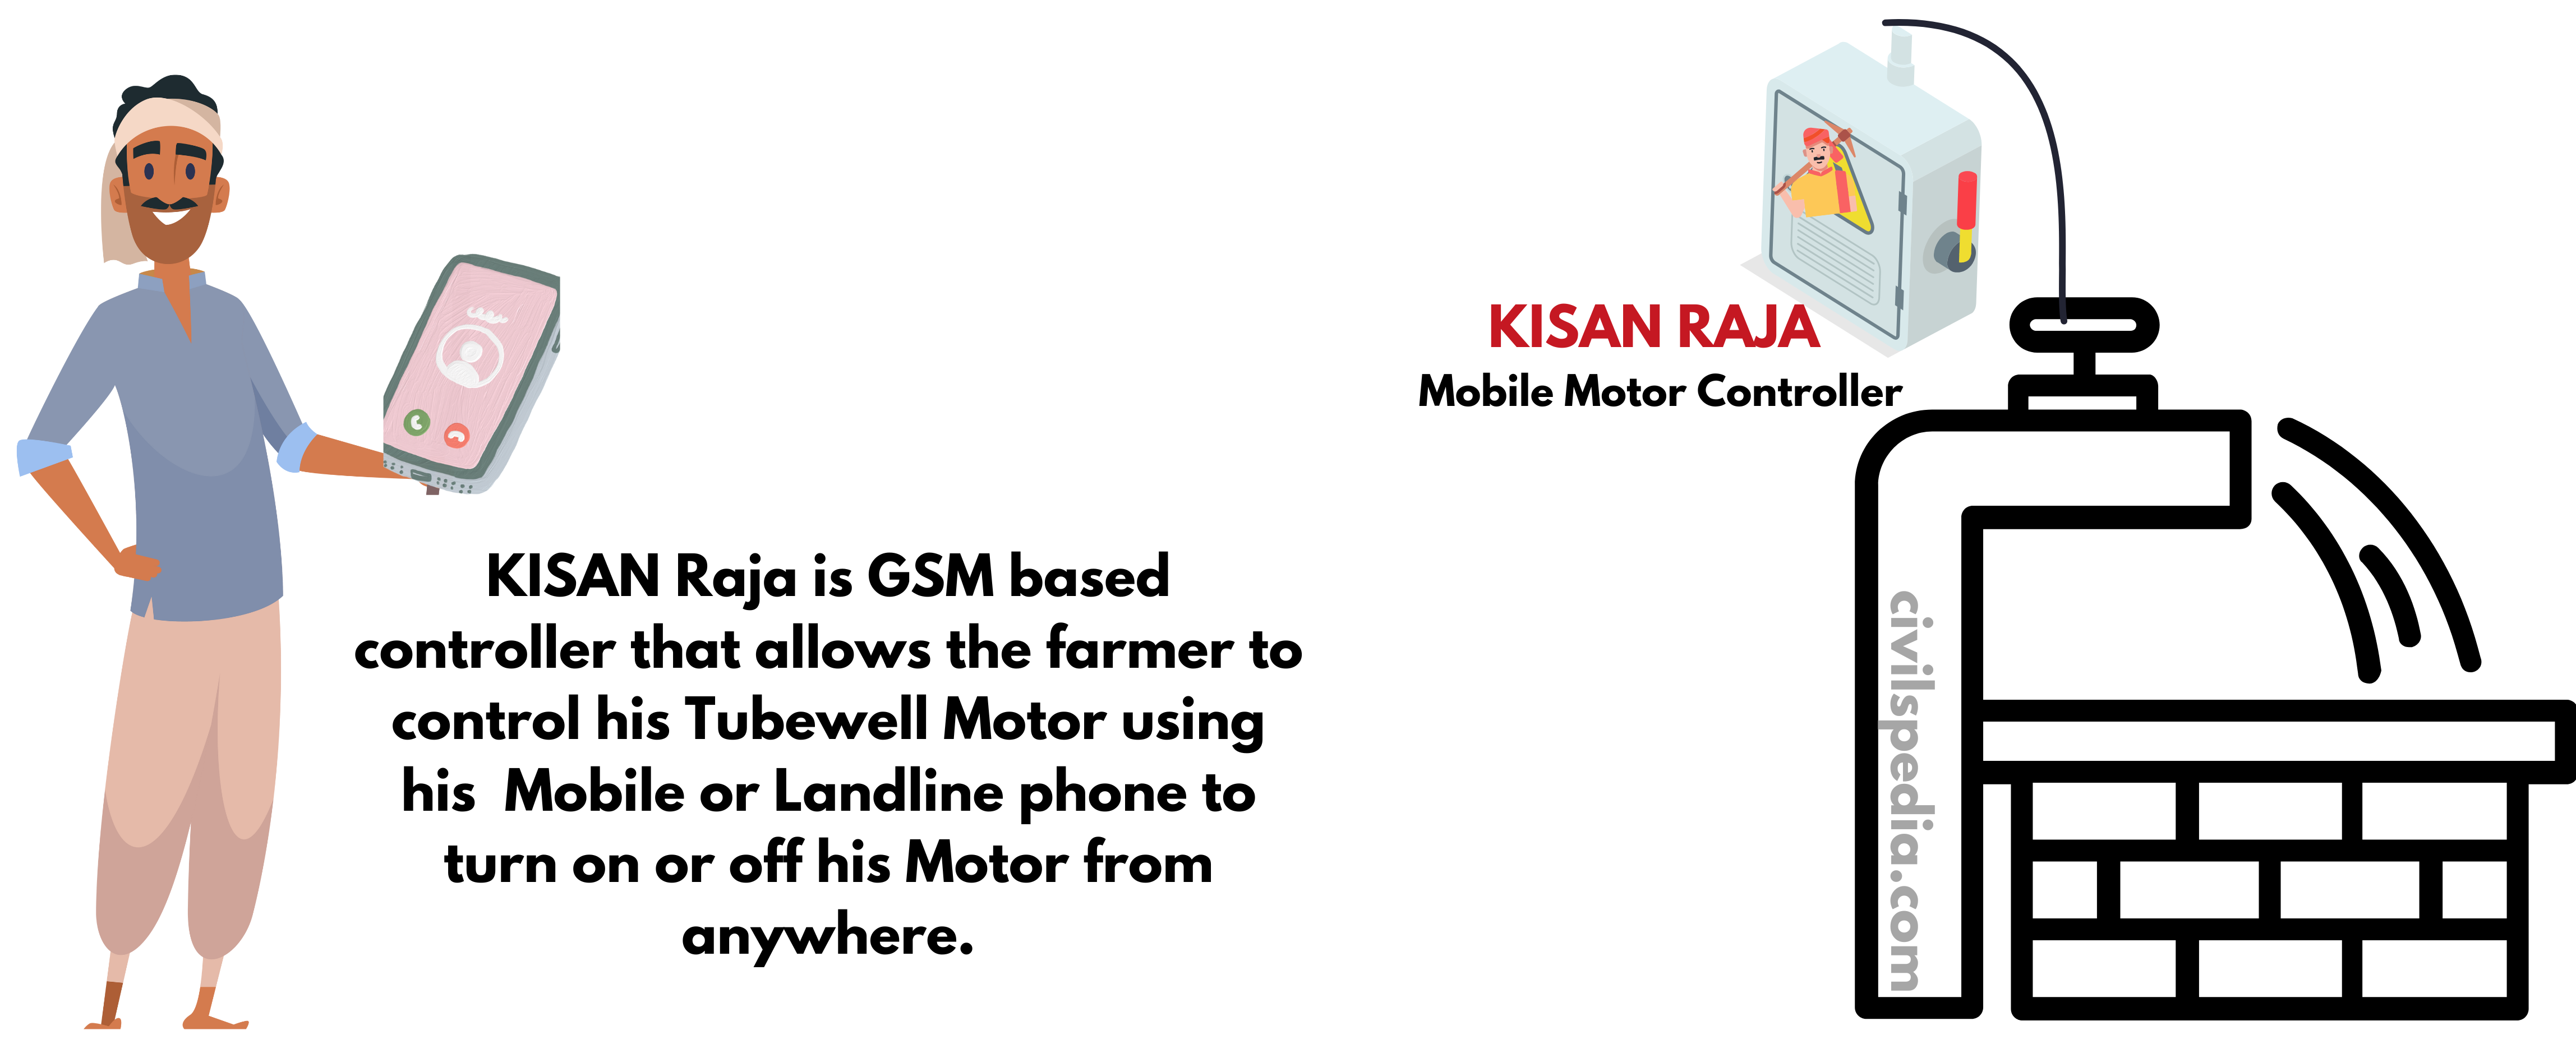 KISAN Raja and E-Technology in the Aid of Farmers
